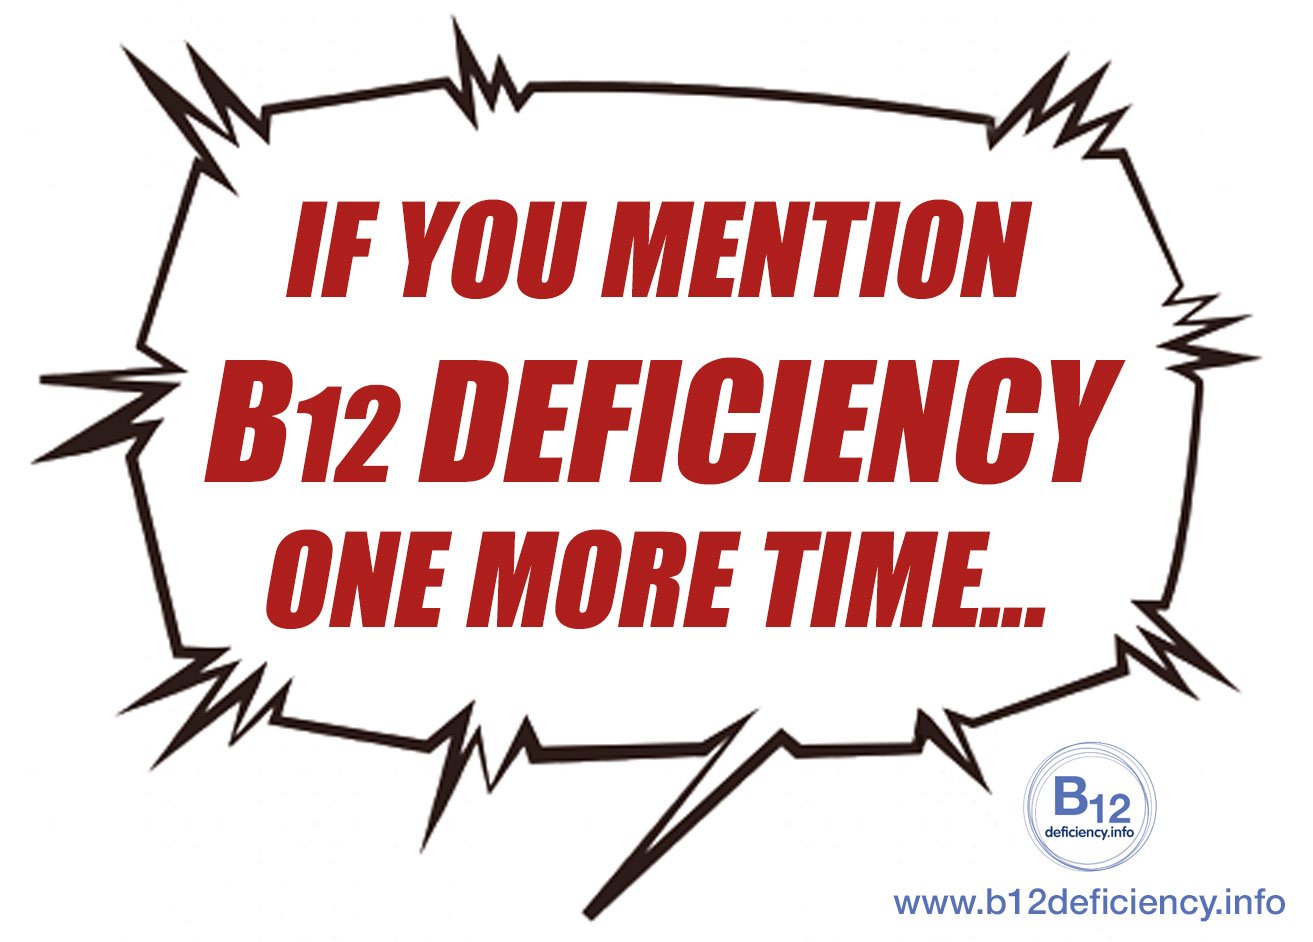 Have you been told to shut up about B12 deficiency?